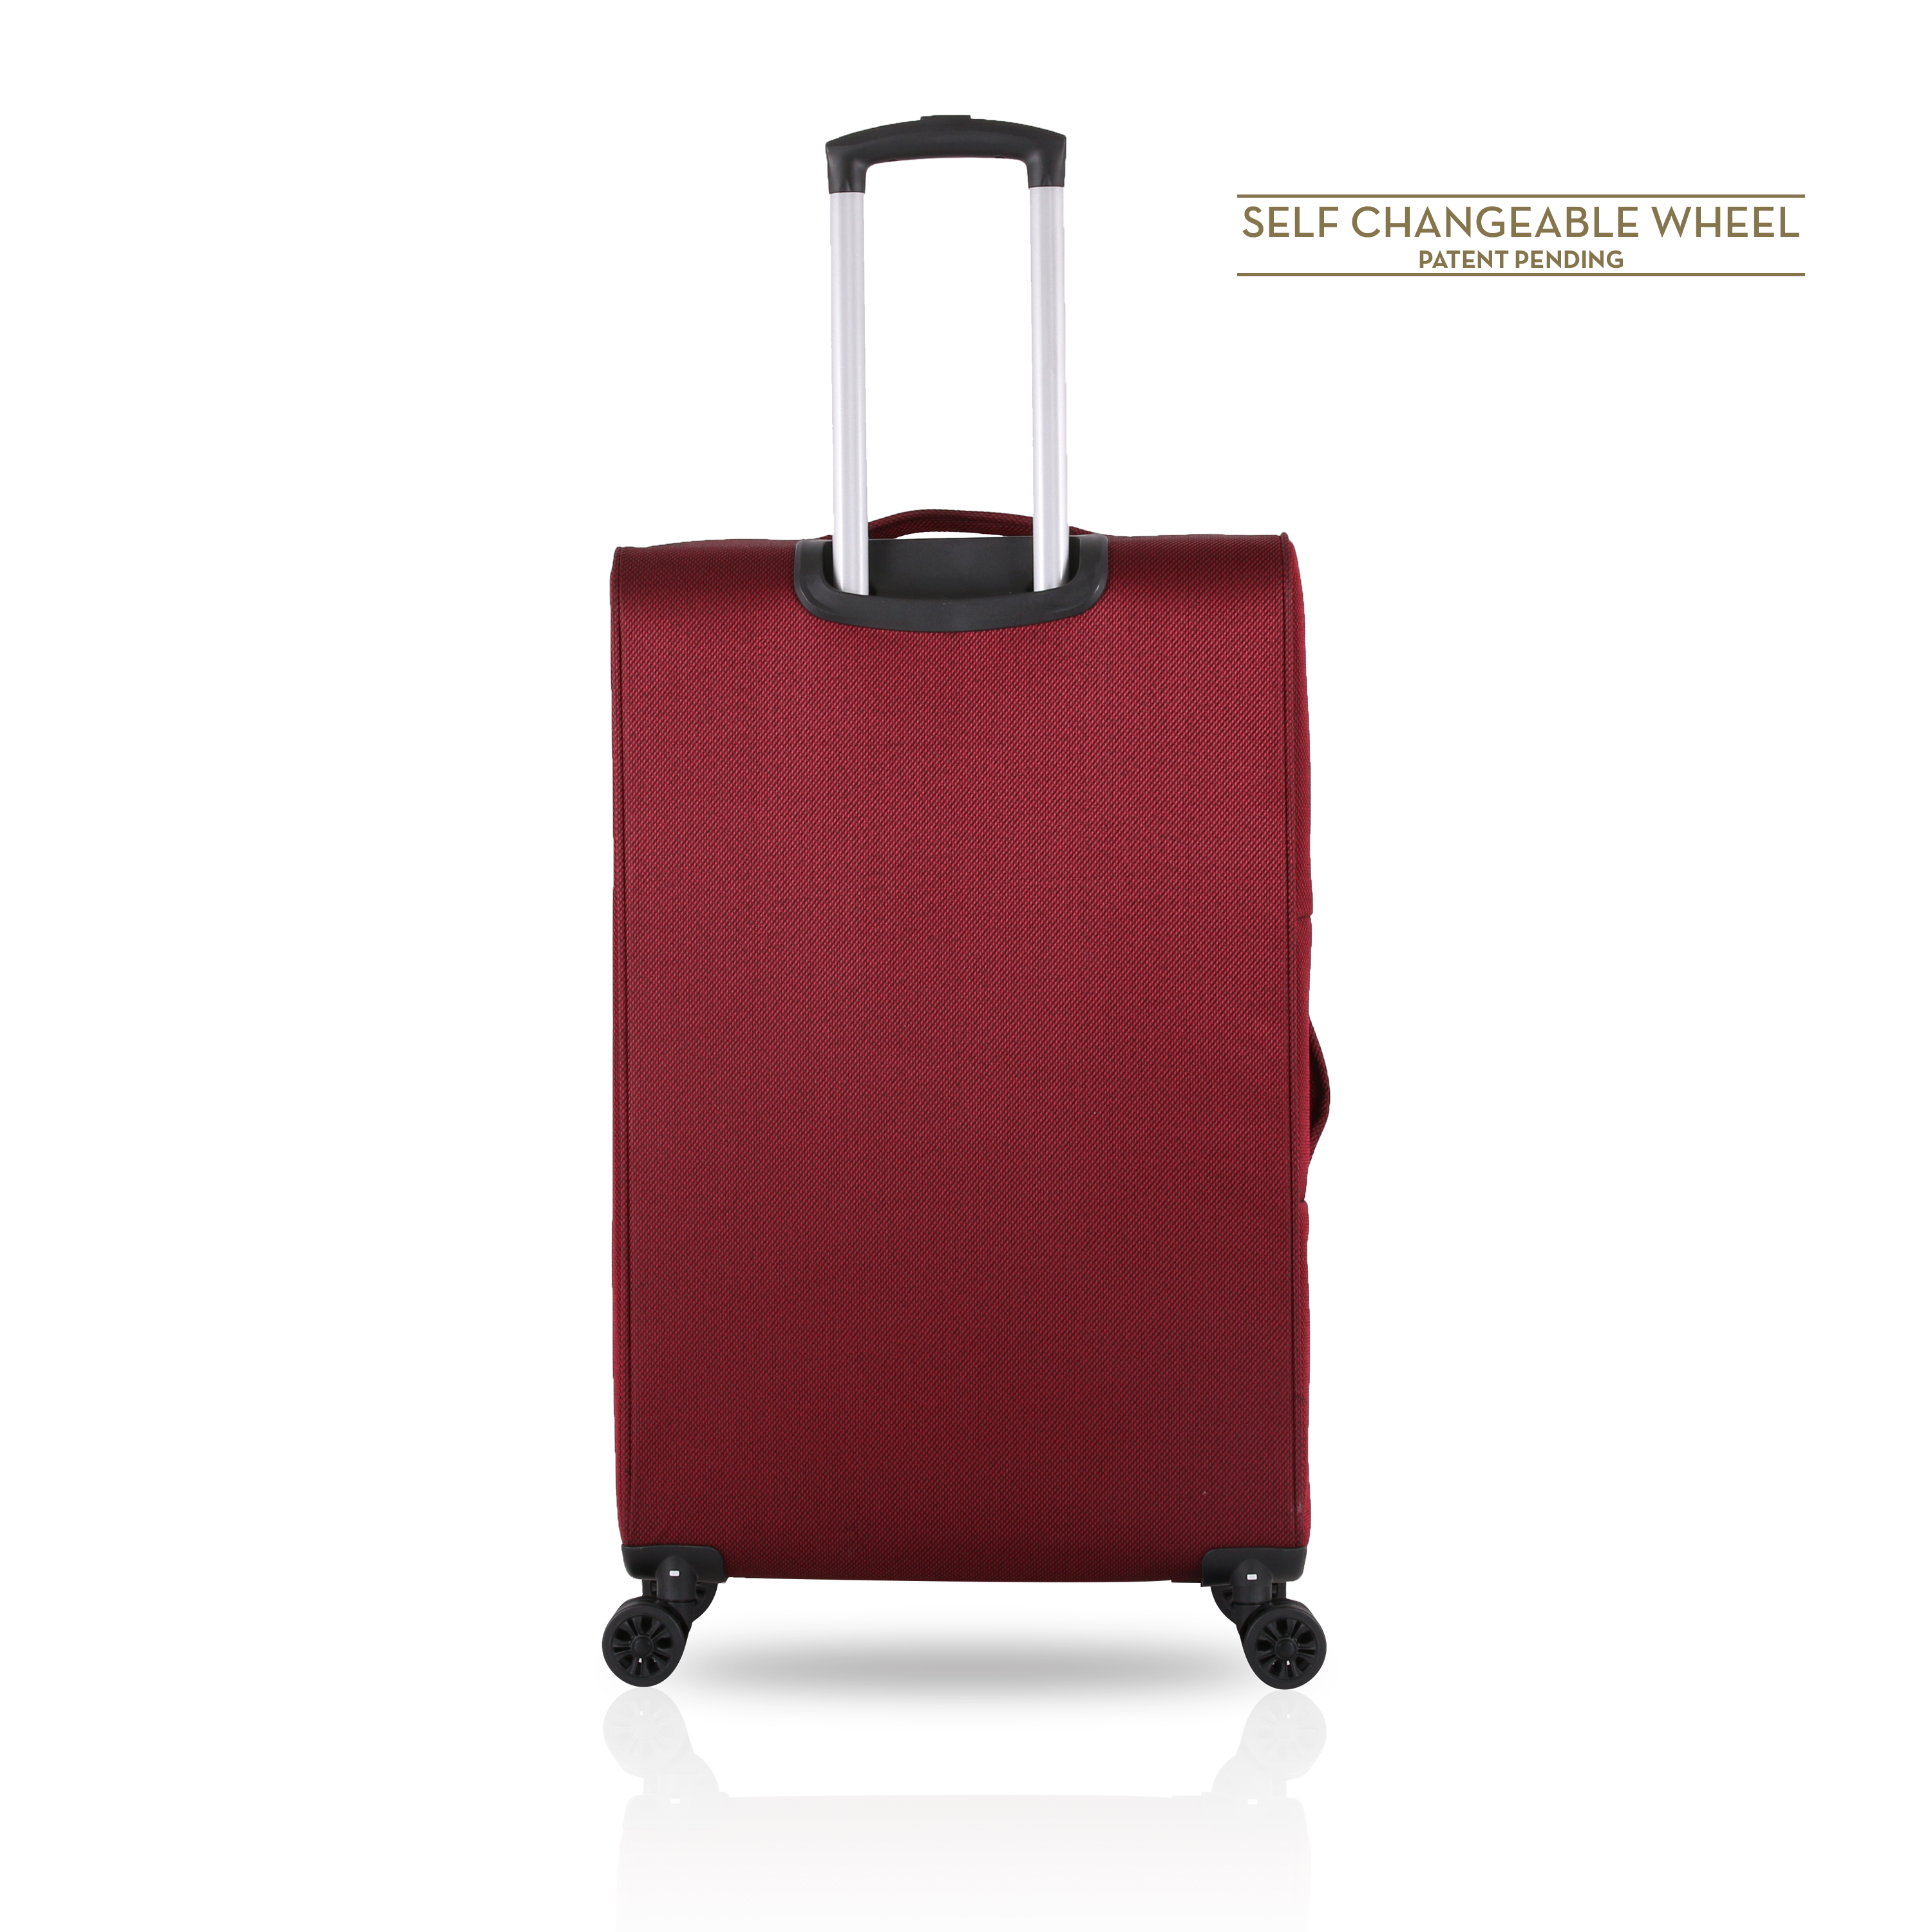 TUCCI Italy 18" DIVISO Carry On Travel Spinner Wheel Suitcase